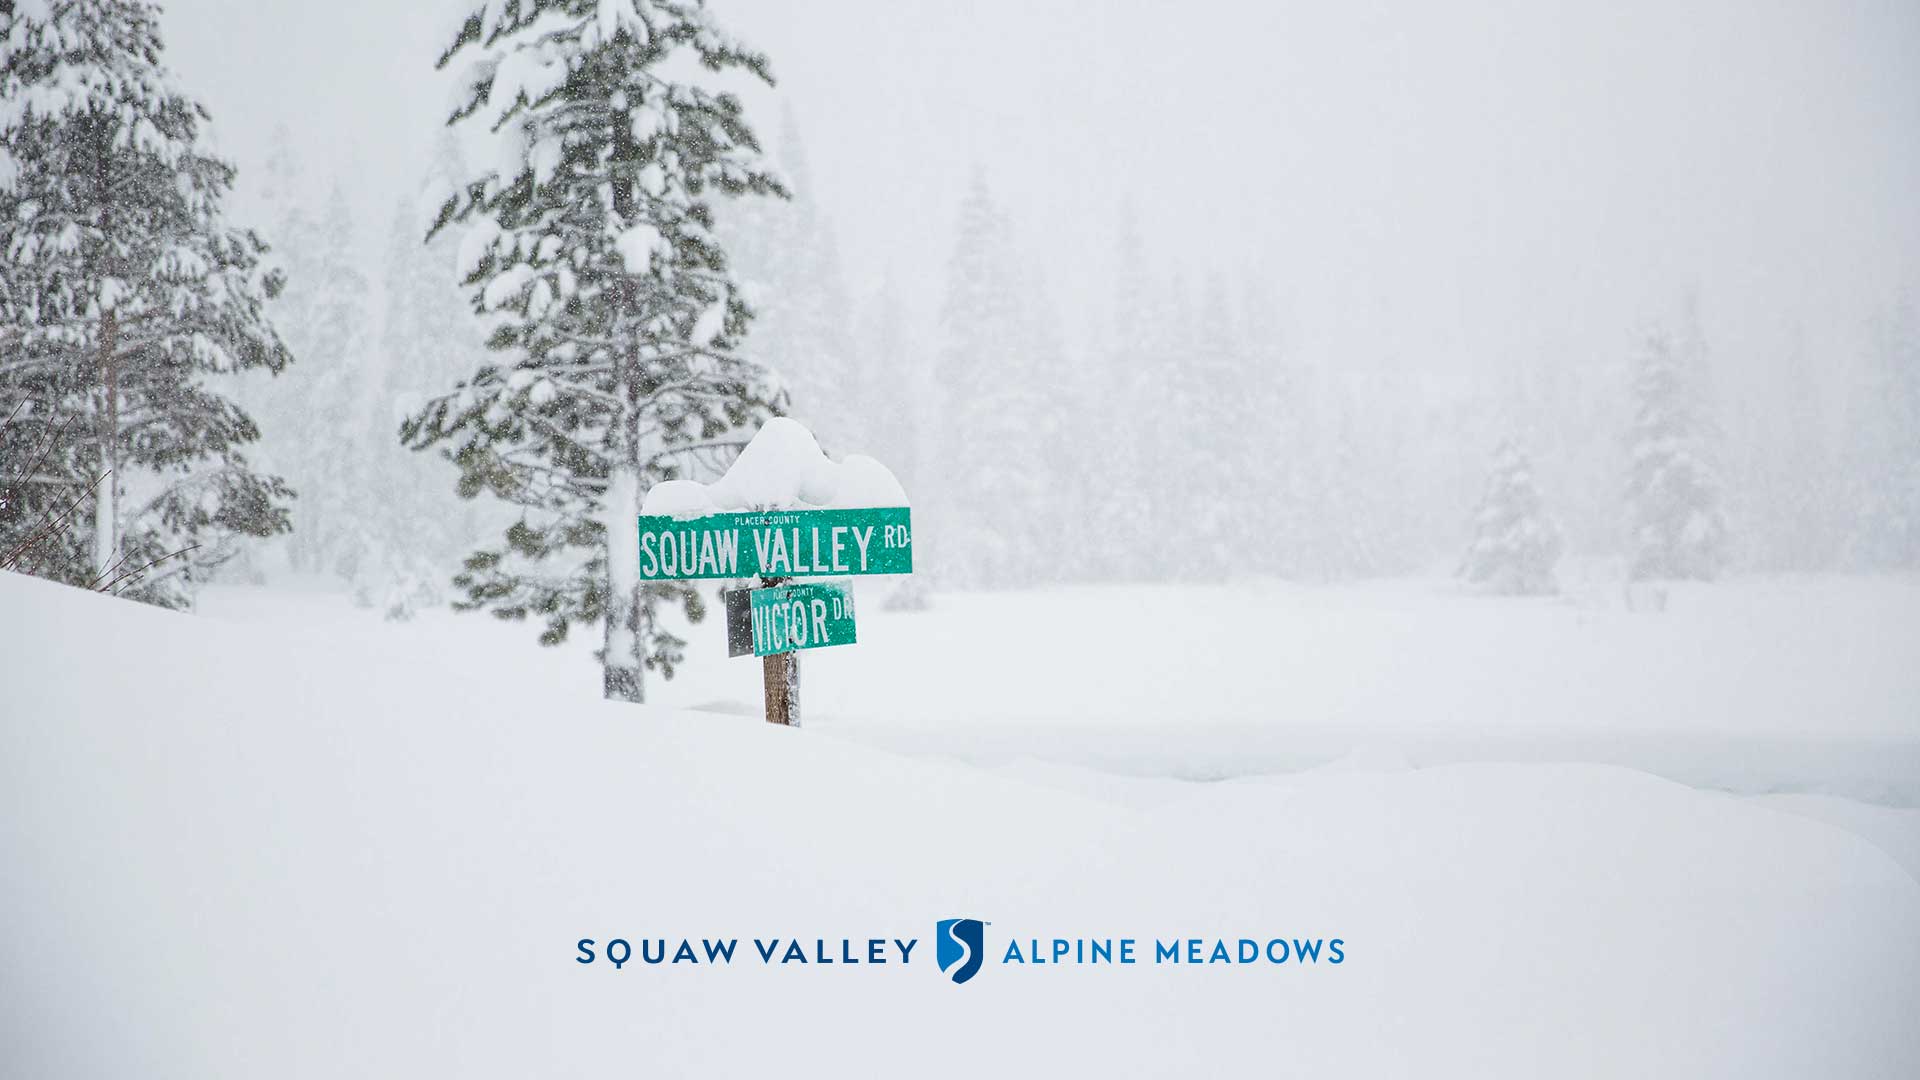 Squaw Valley,